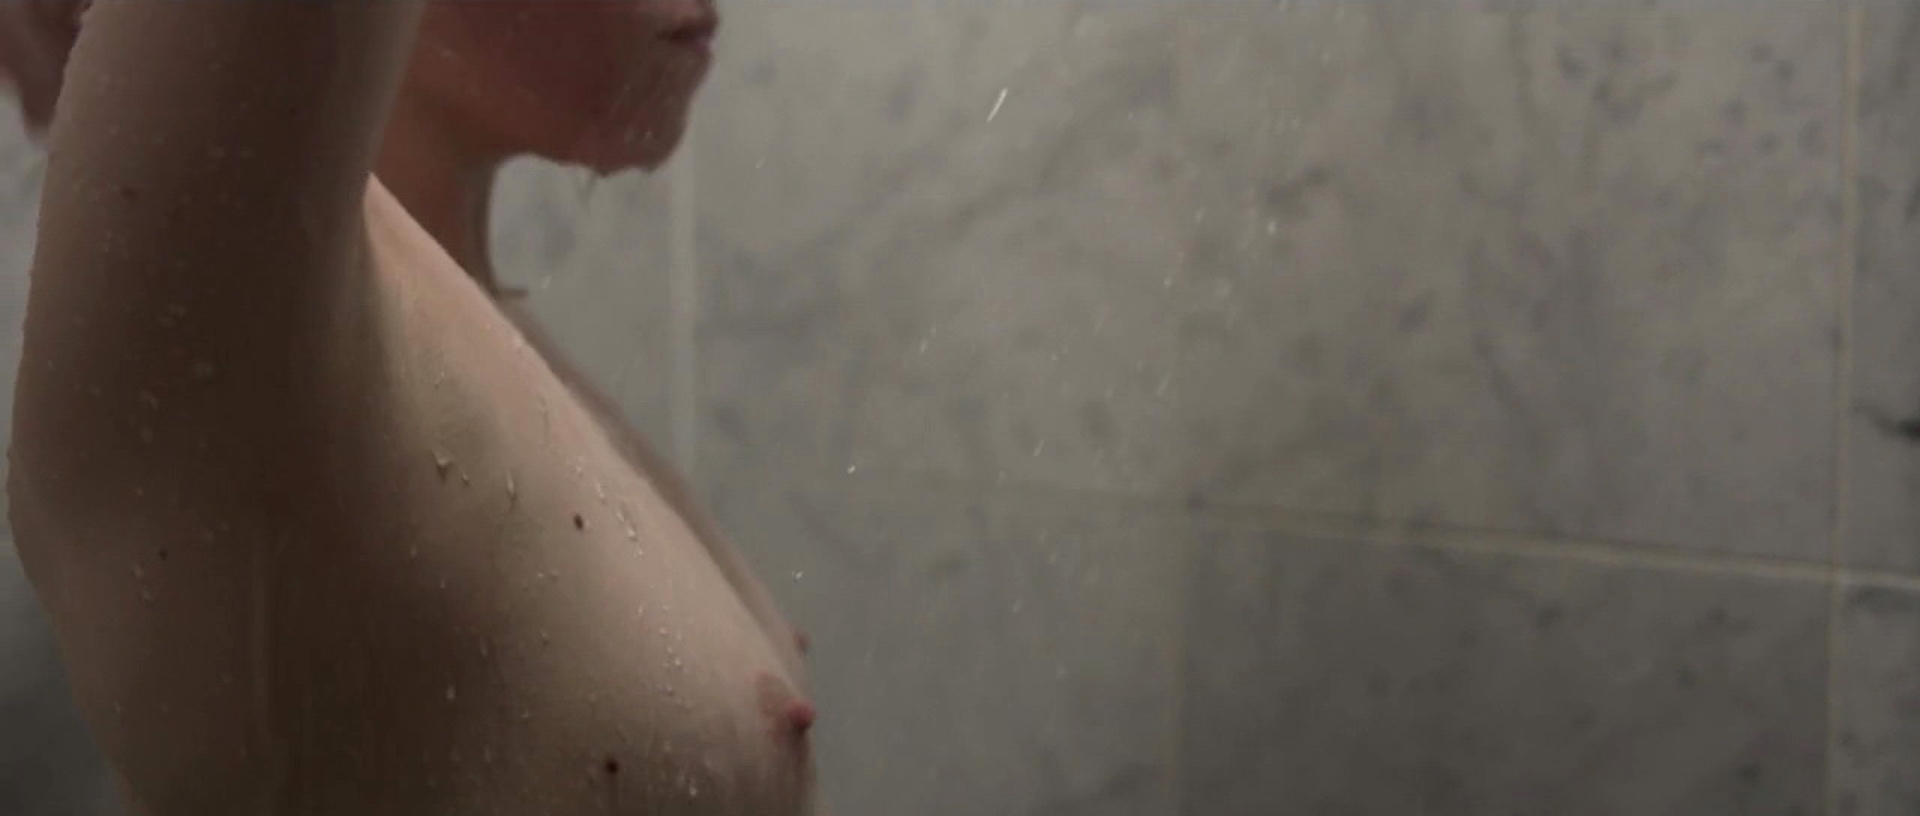 Emily hampshire topless